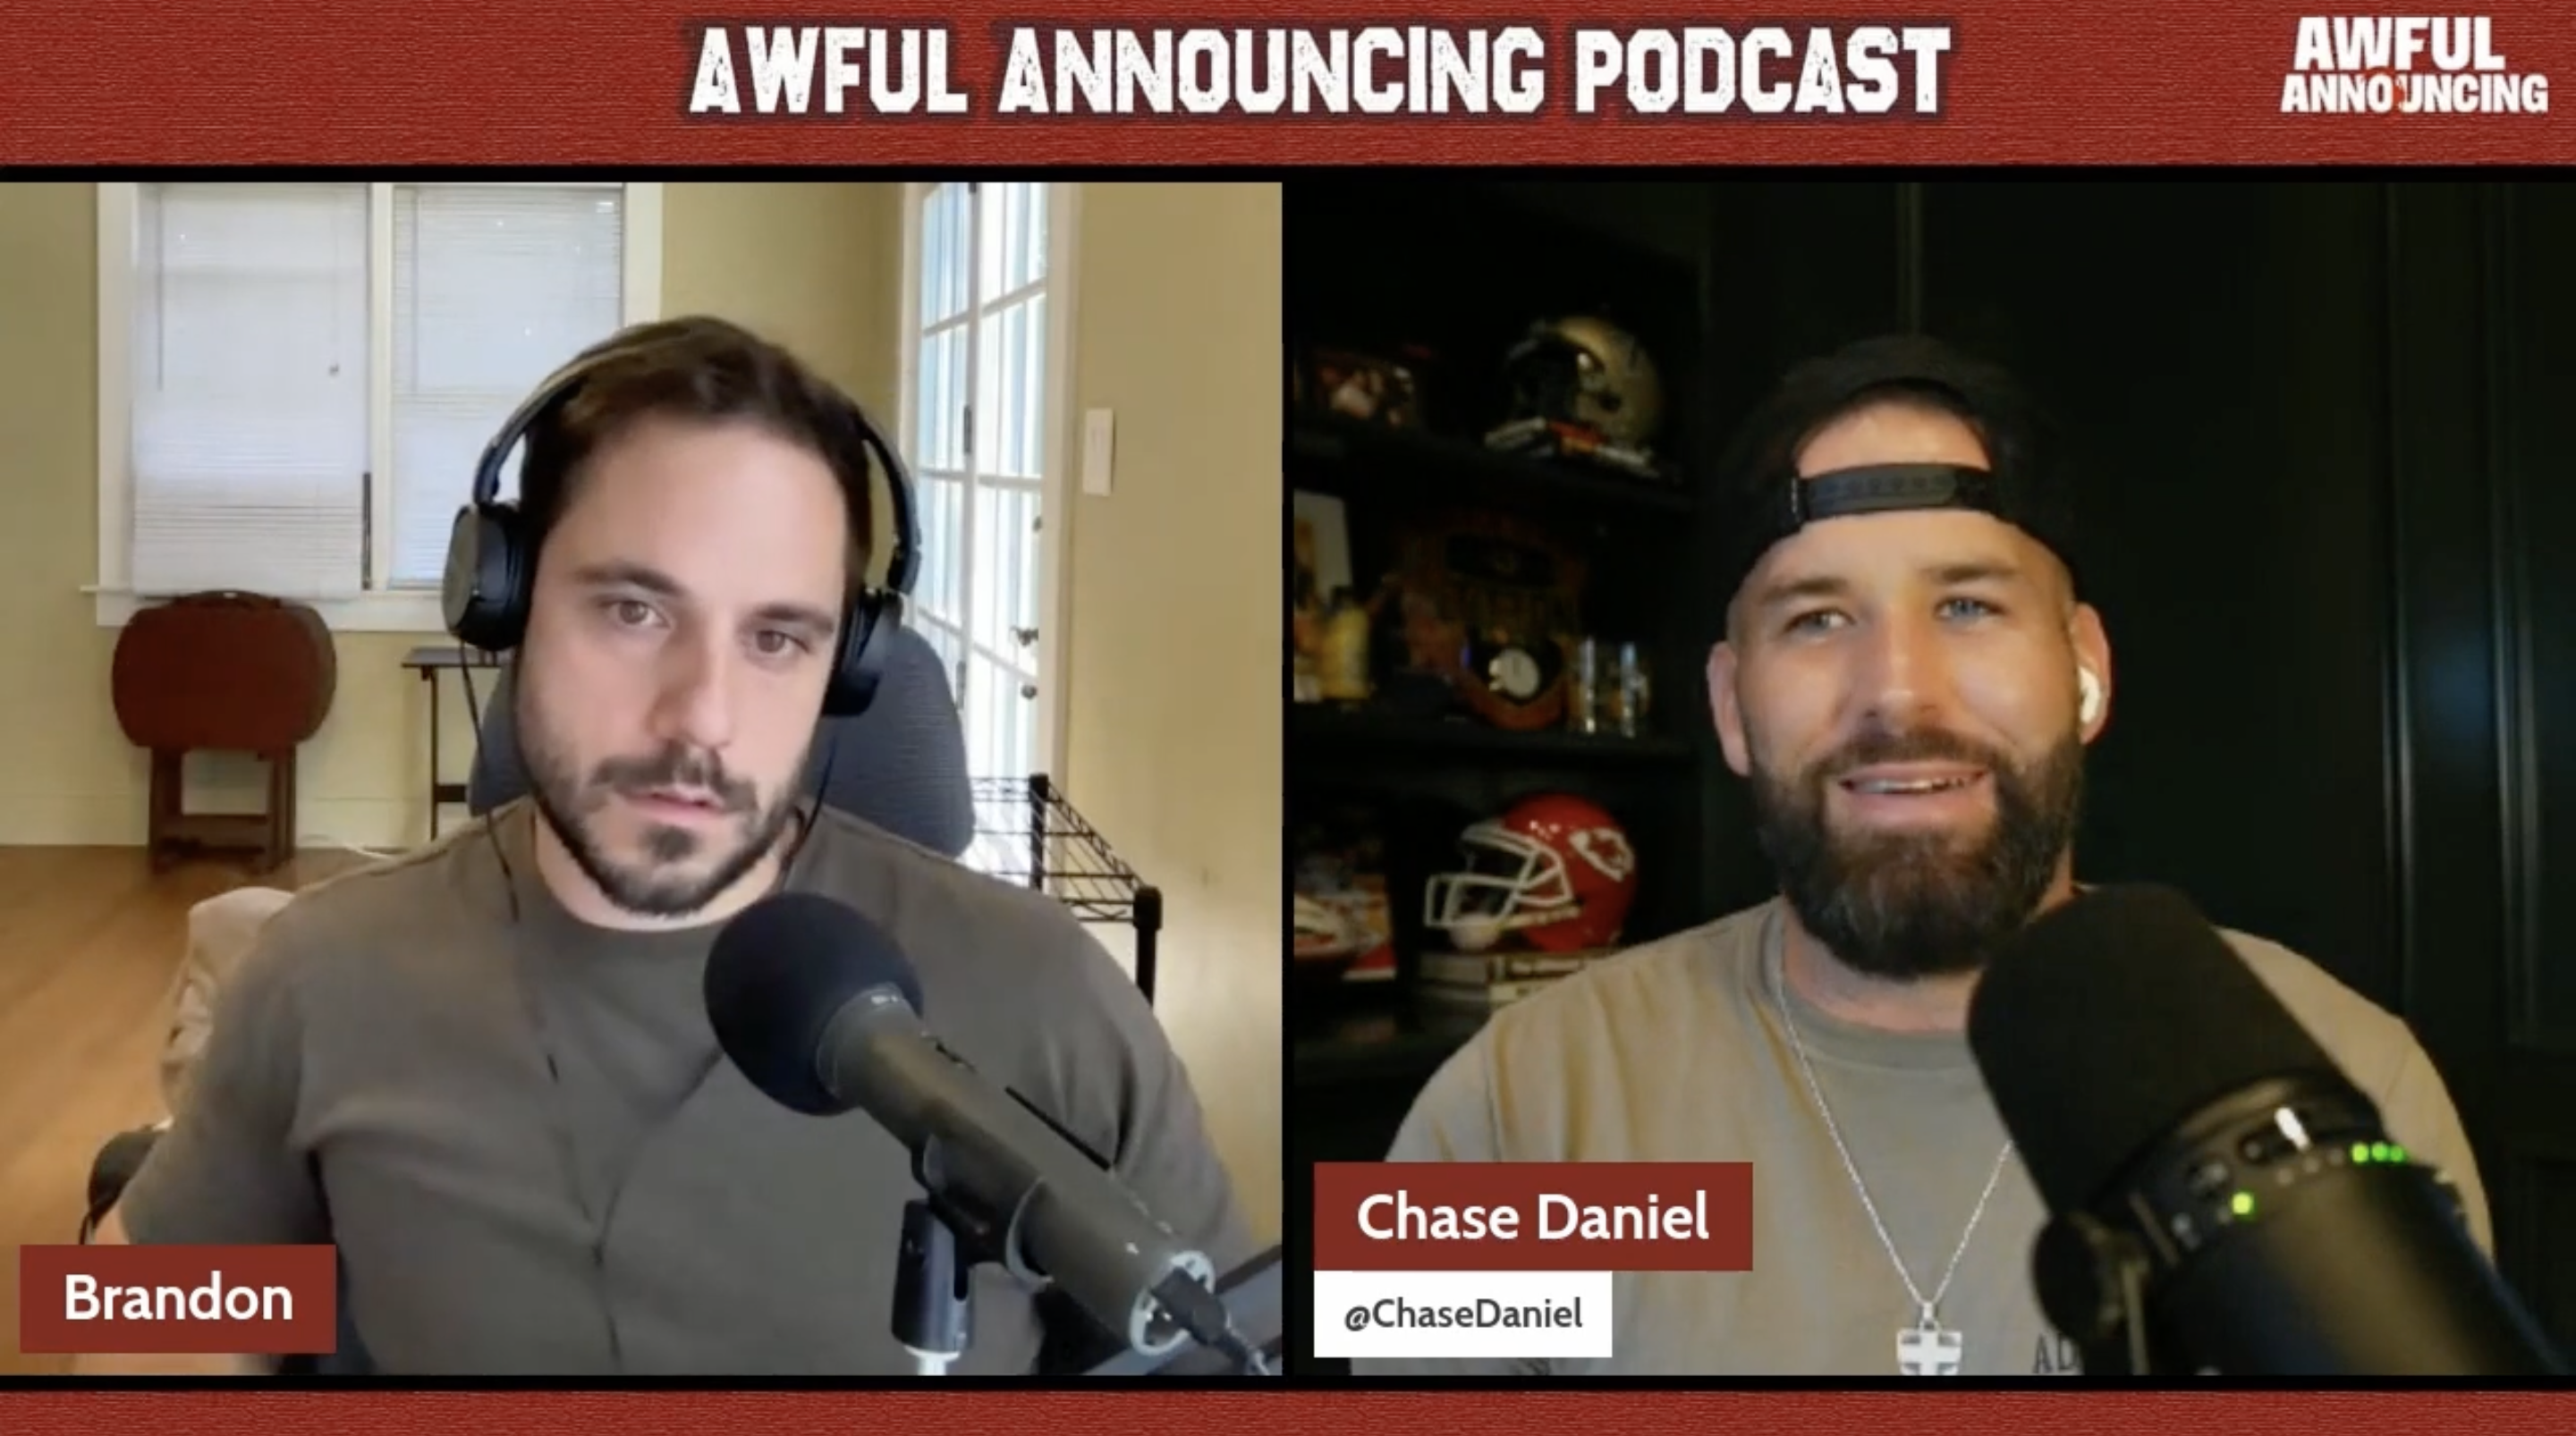 Chase Daniel on the Awful Announcing Podcast